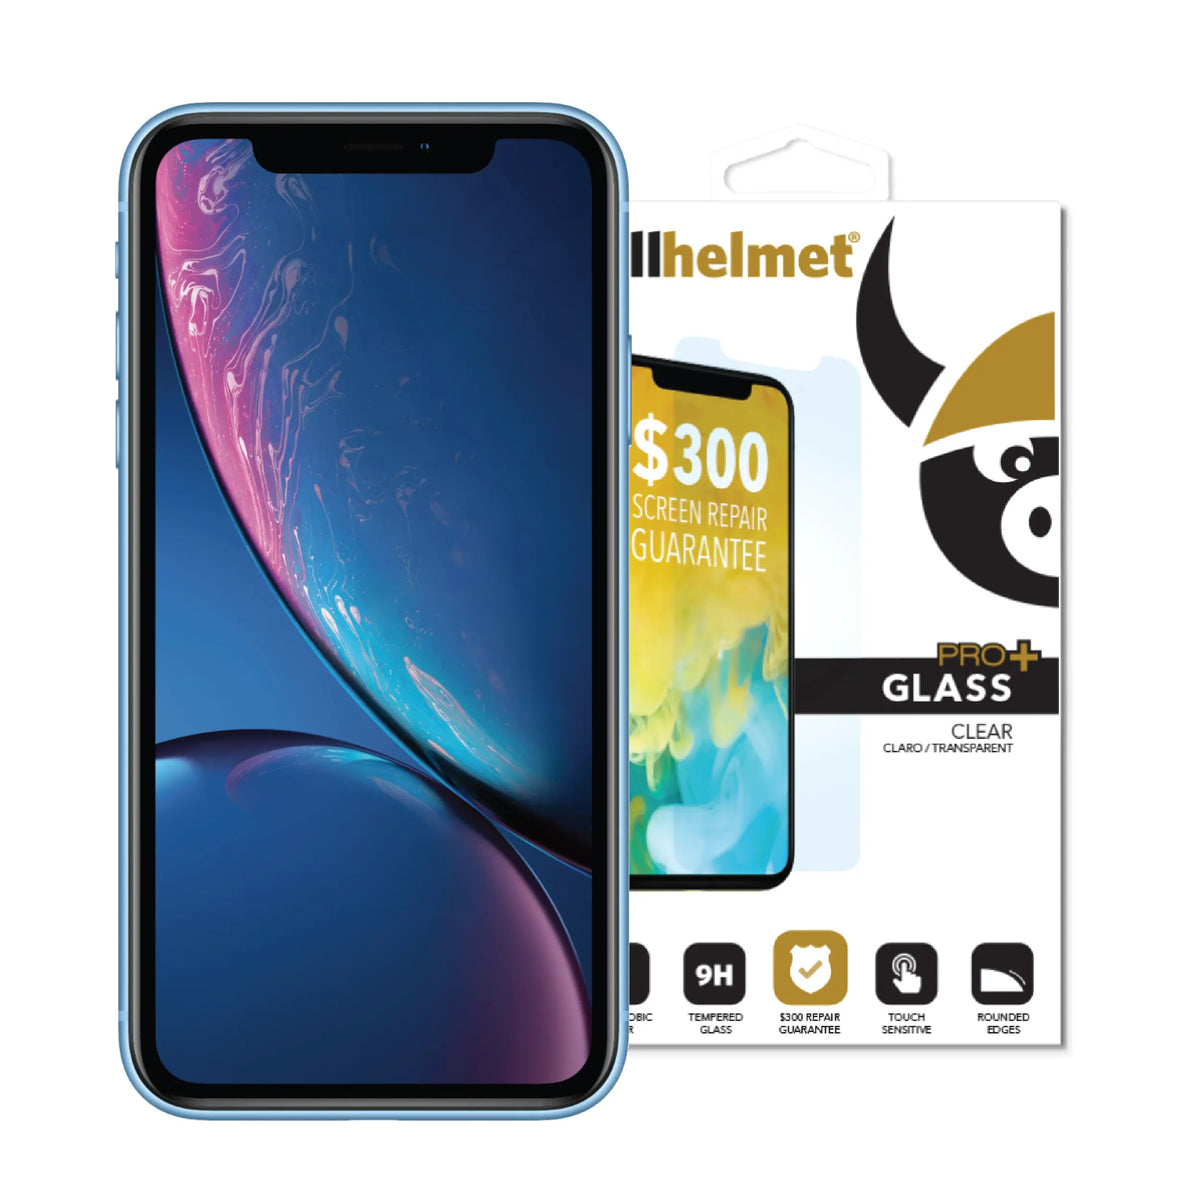 cellhelmet Tempered Glass Screen Protector for iPhone XR with Insurance